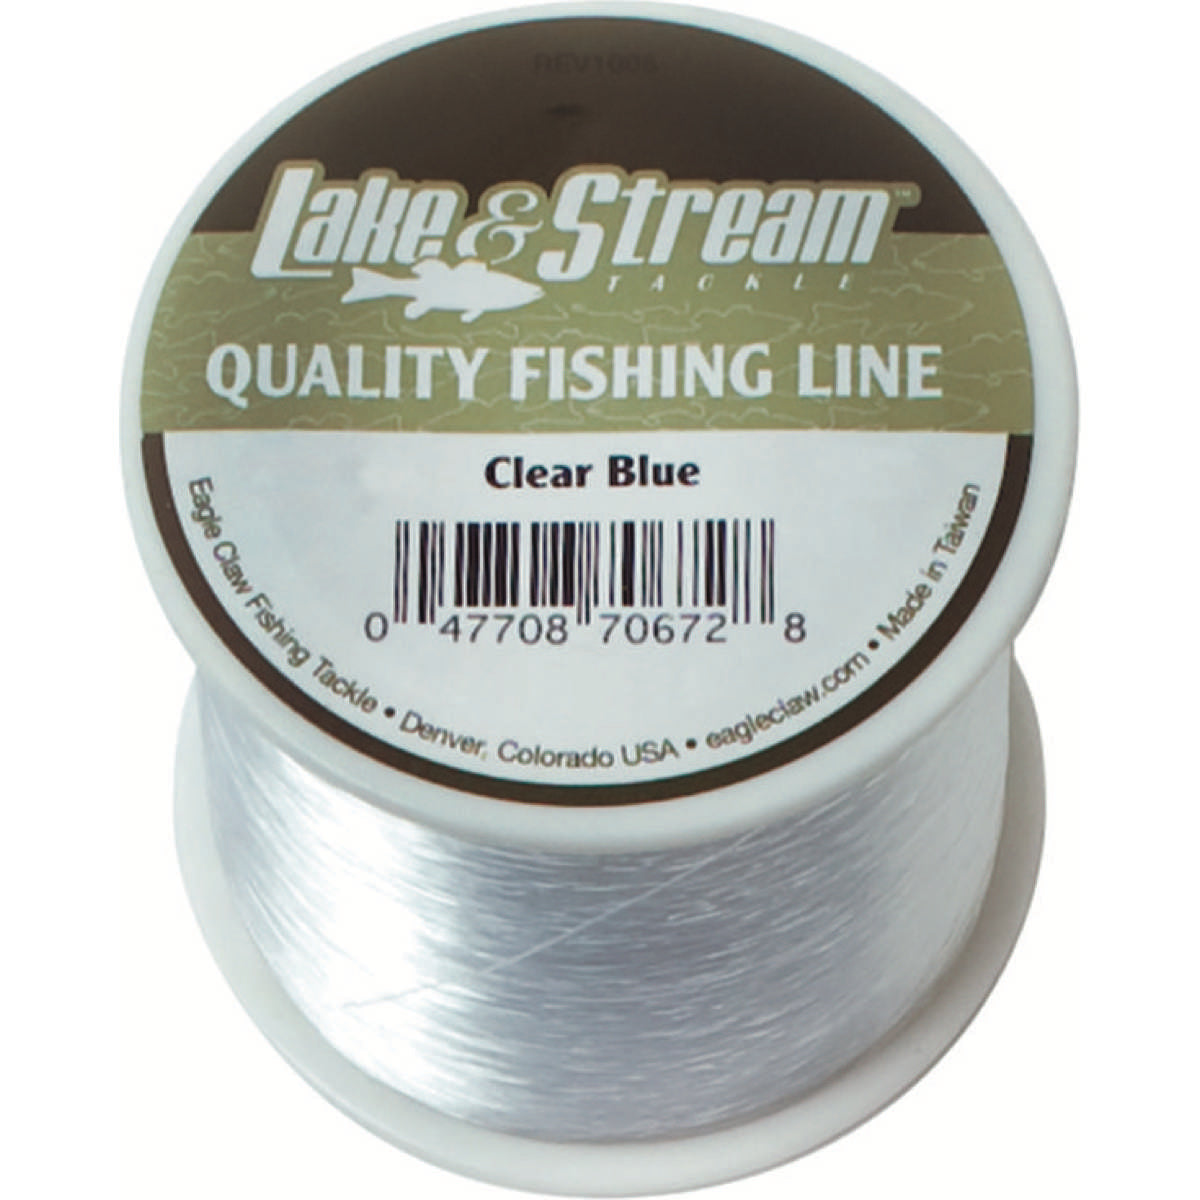 Photo of Eagle Claw Lake & Stream Clear Blue Fishing Line for sale at United Tackle Shops.